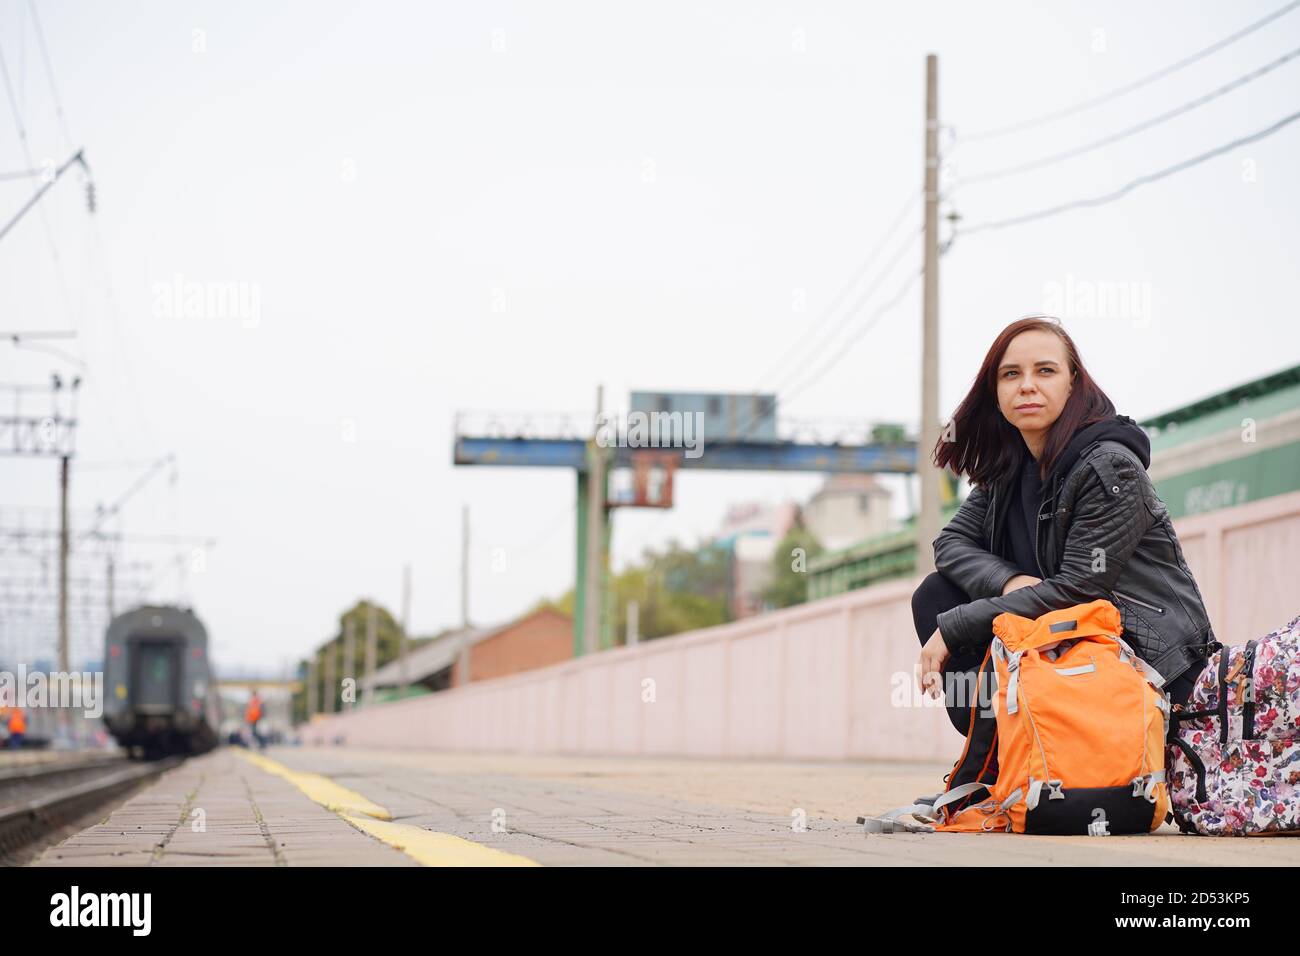 Young woman squats on platform, waiting for train. Female passenger with backpacks sitting on railroad platform in waiting for train ride. Stock Photo